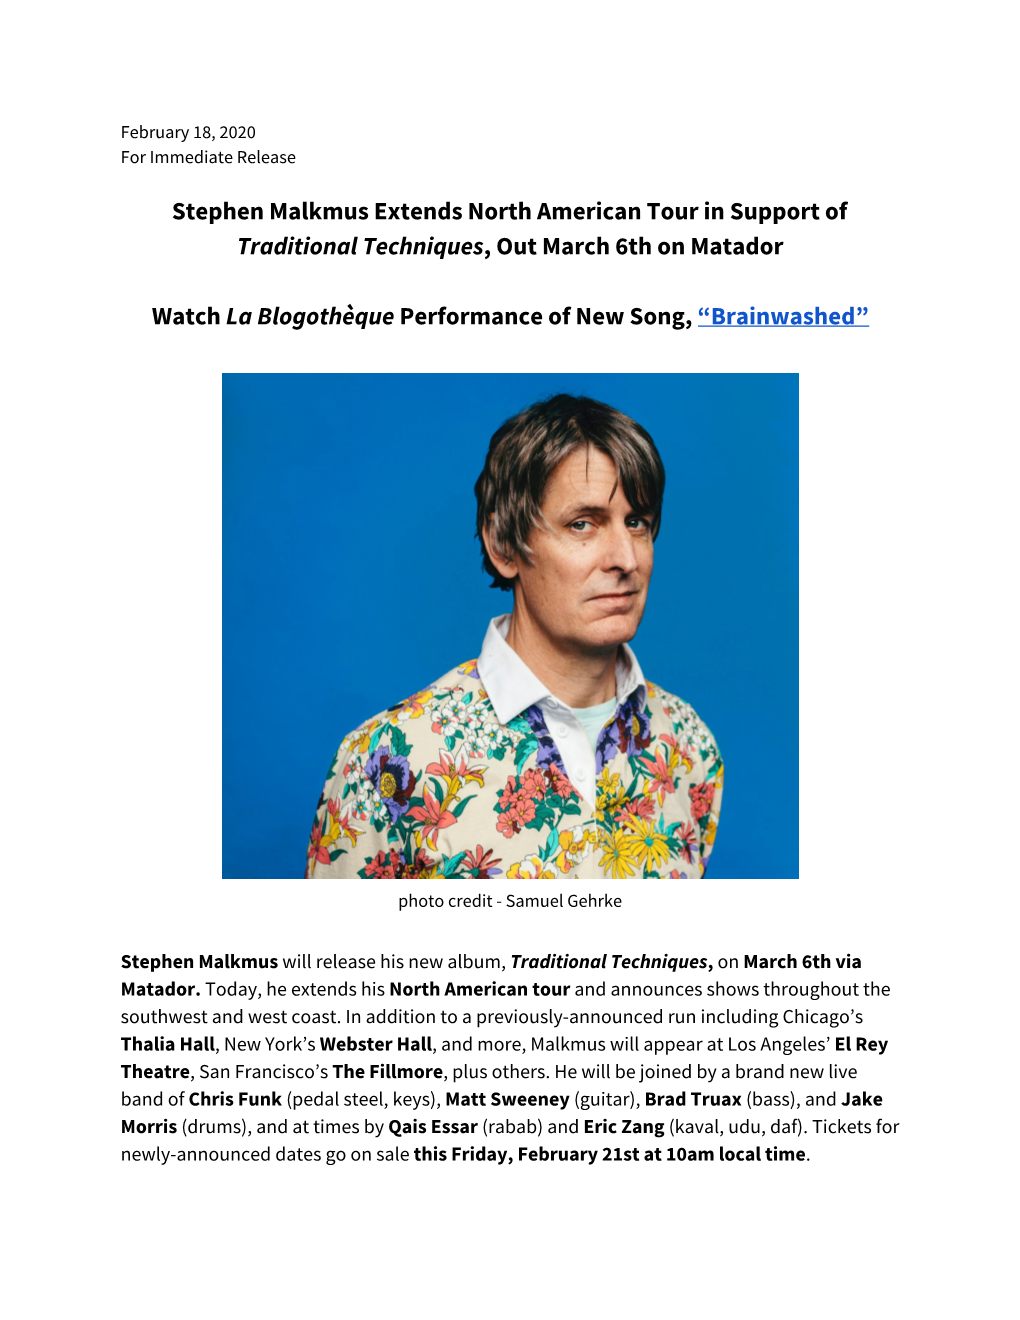 February 18, 2020 Stephen Malkmus Extends North American Tour In